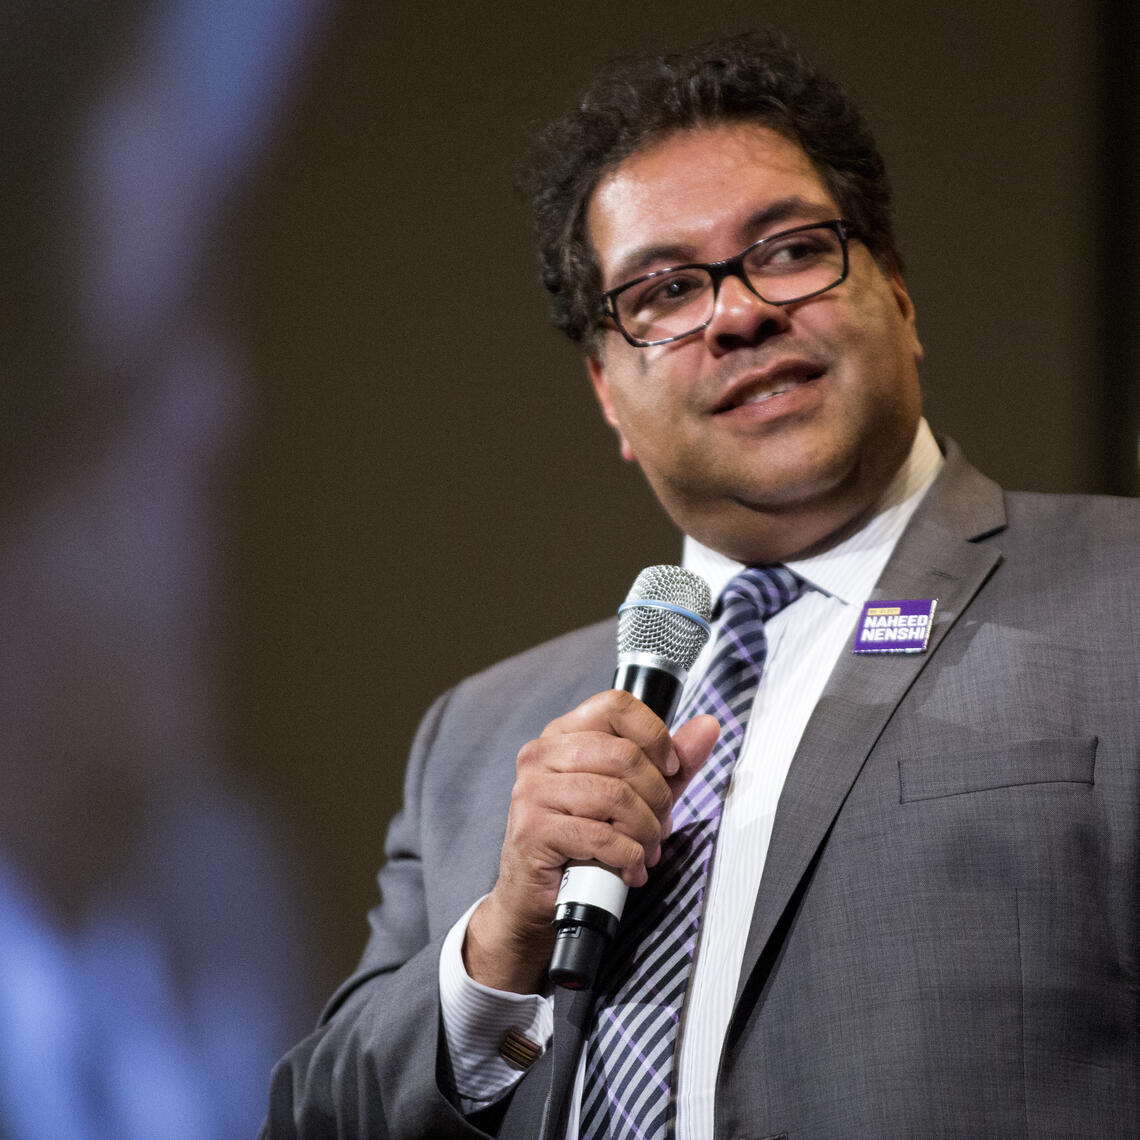 Mayor Nenshi wearing a grey suit and holding a microphone on stage at an event.